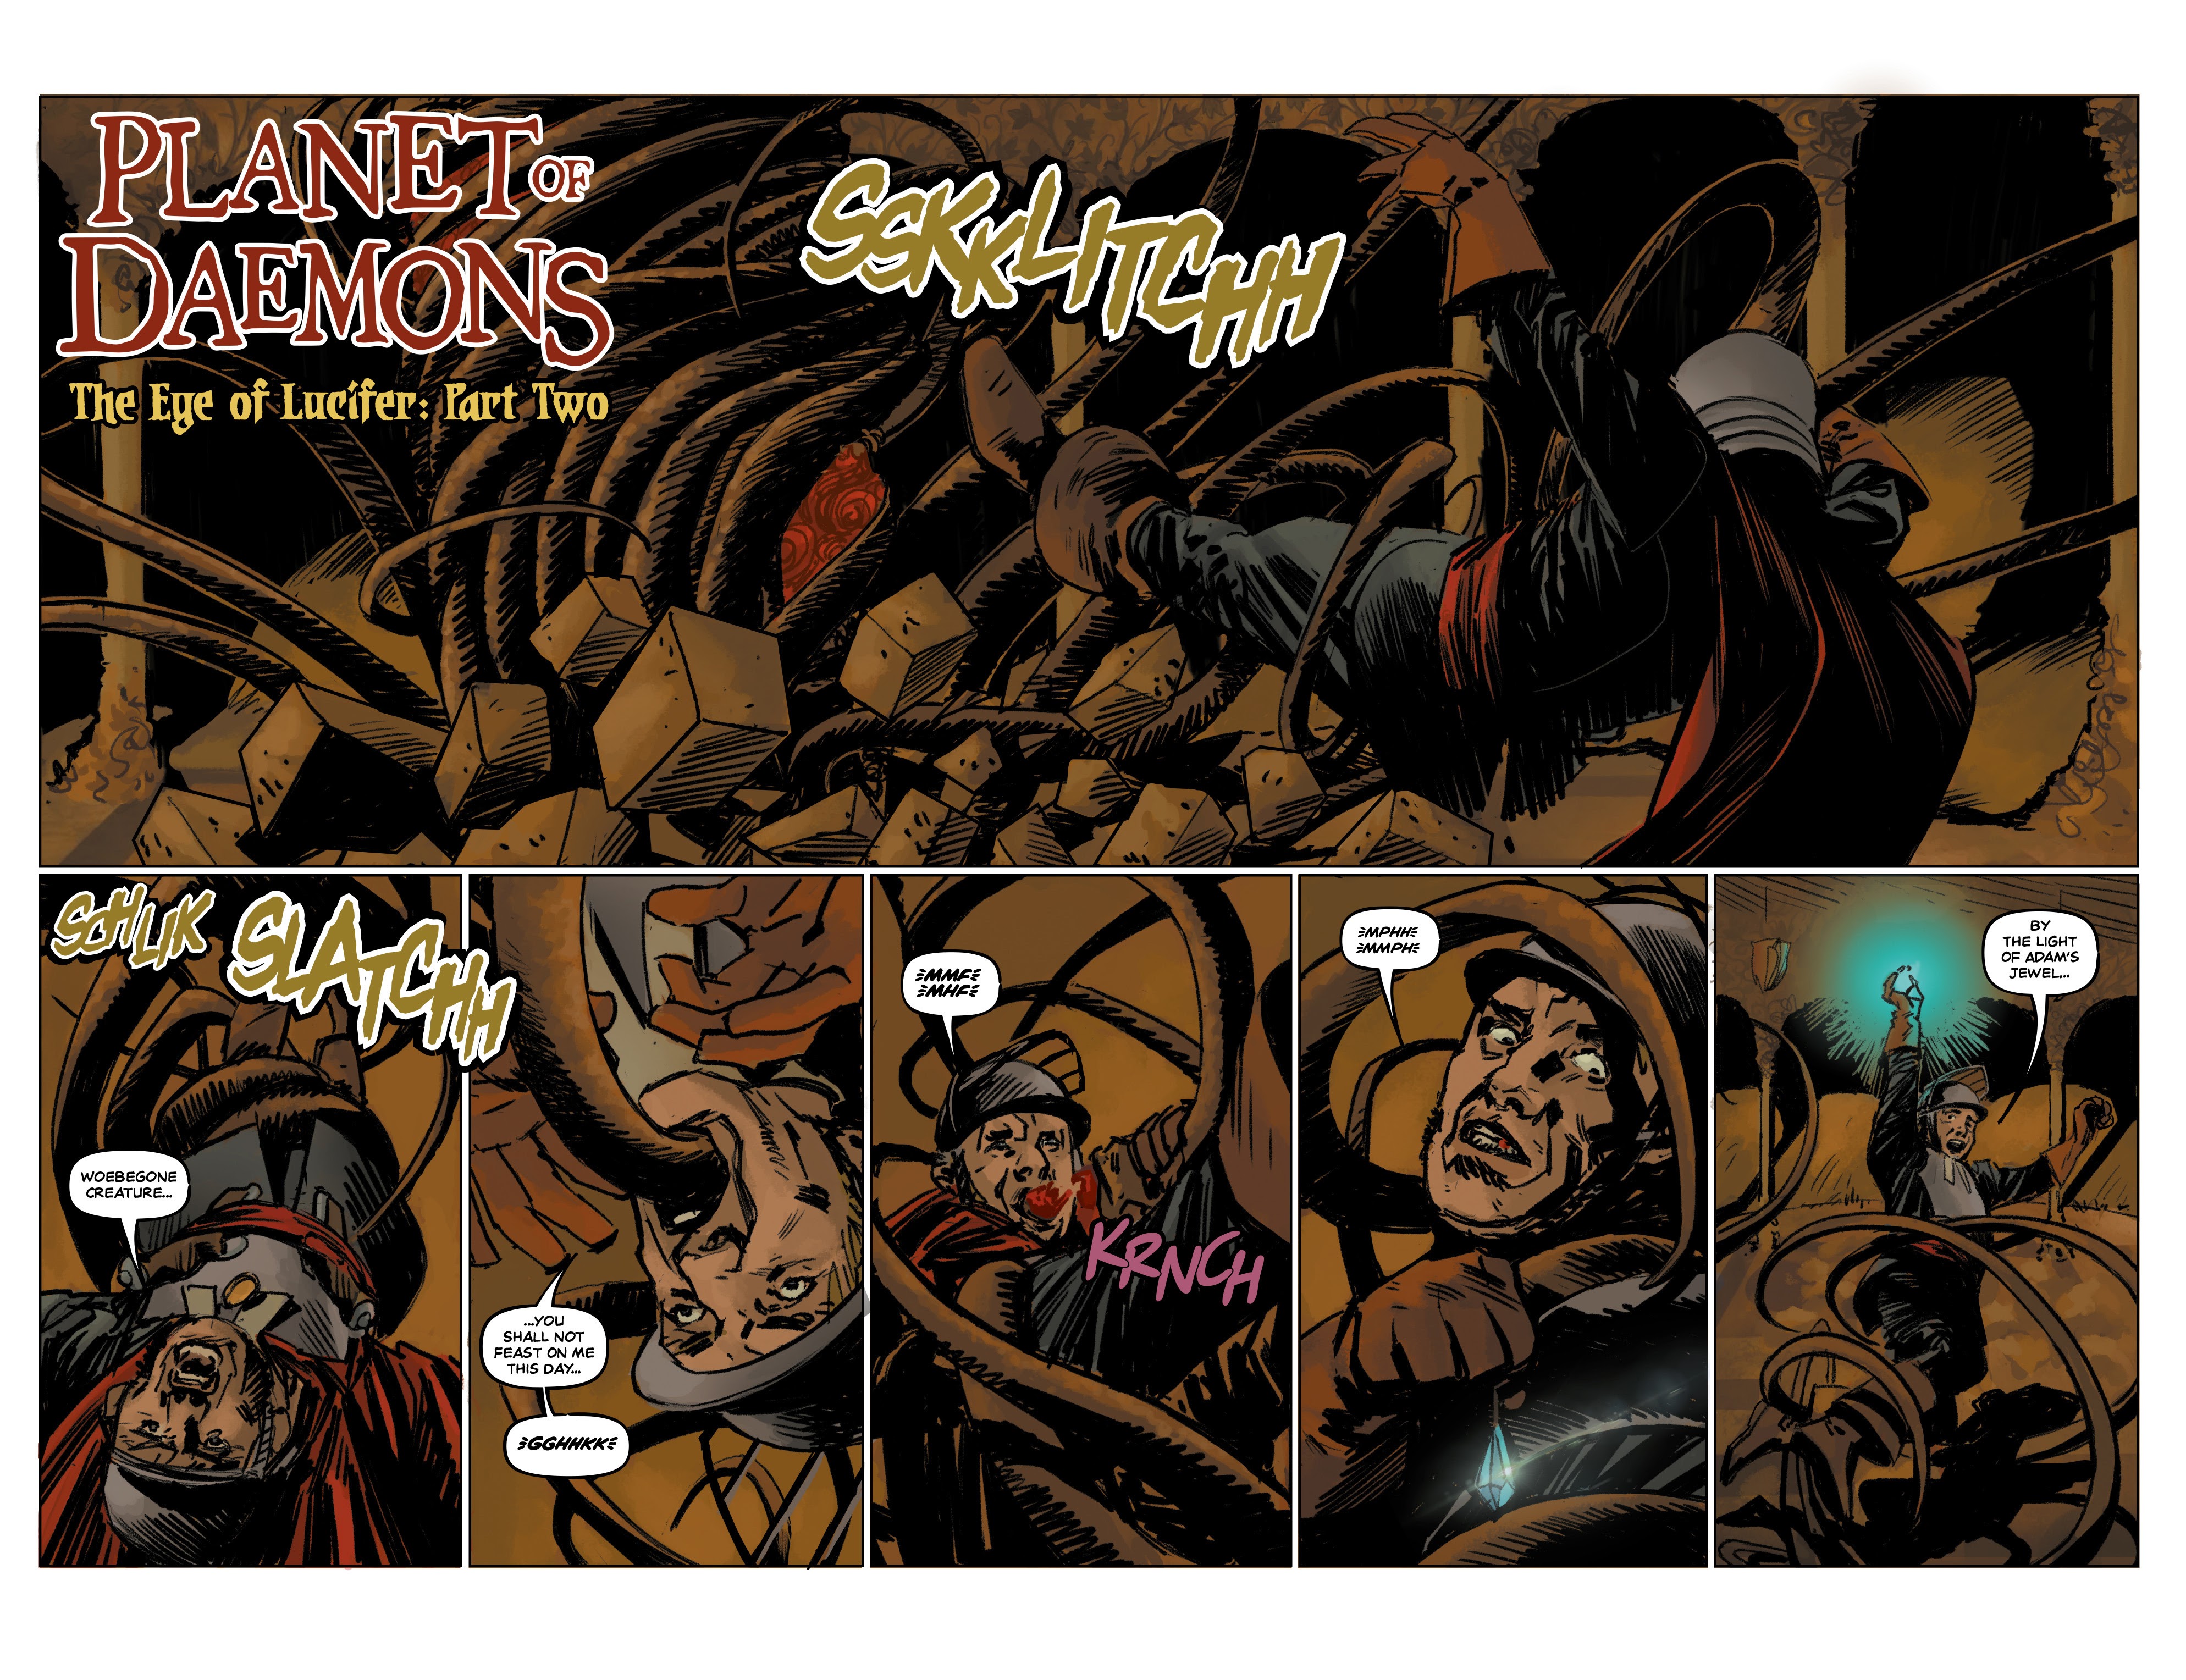 Read online Planet of Daemons comic -  Issue #2 - 4